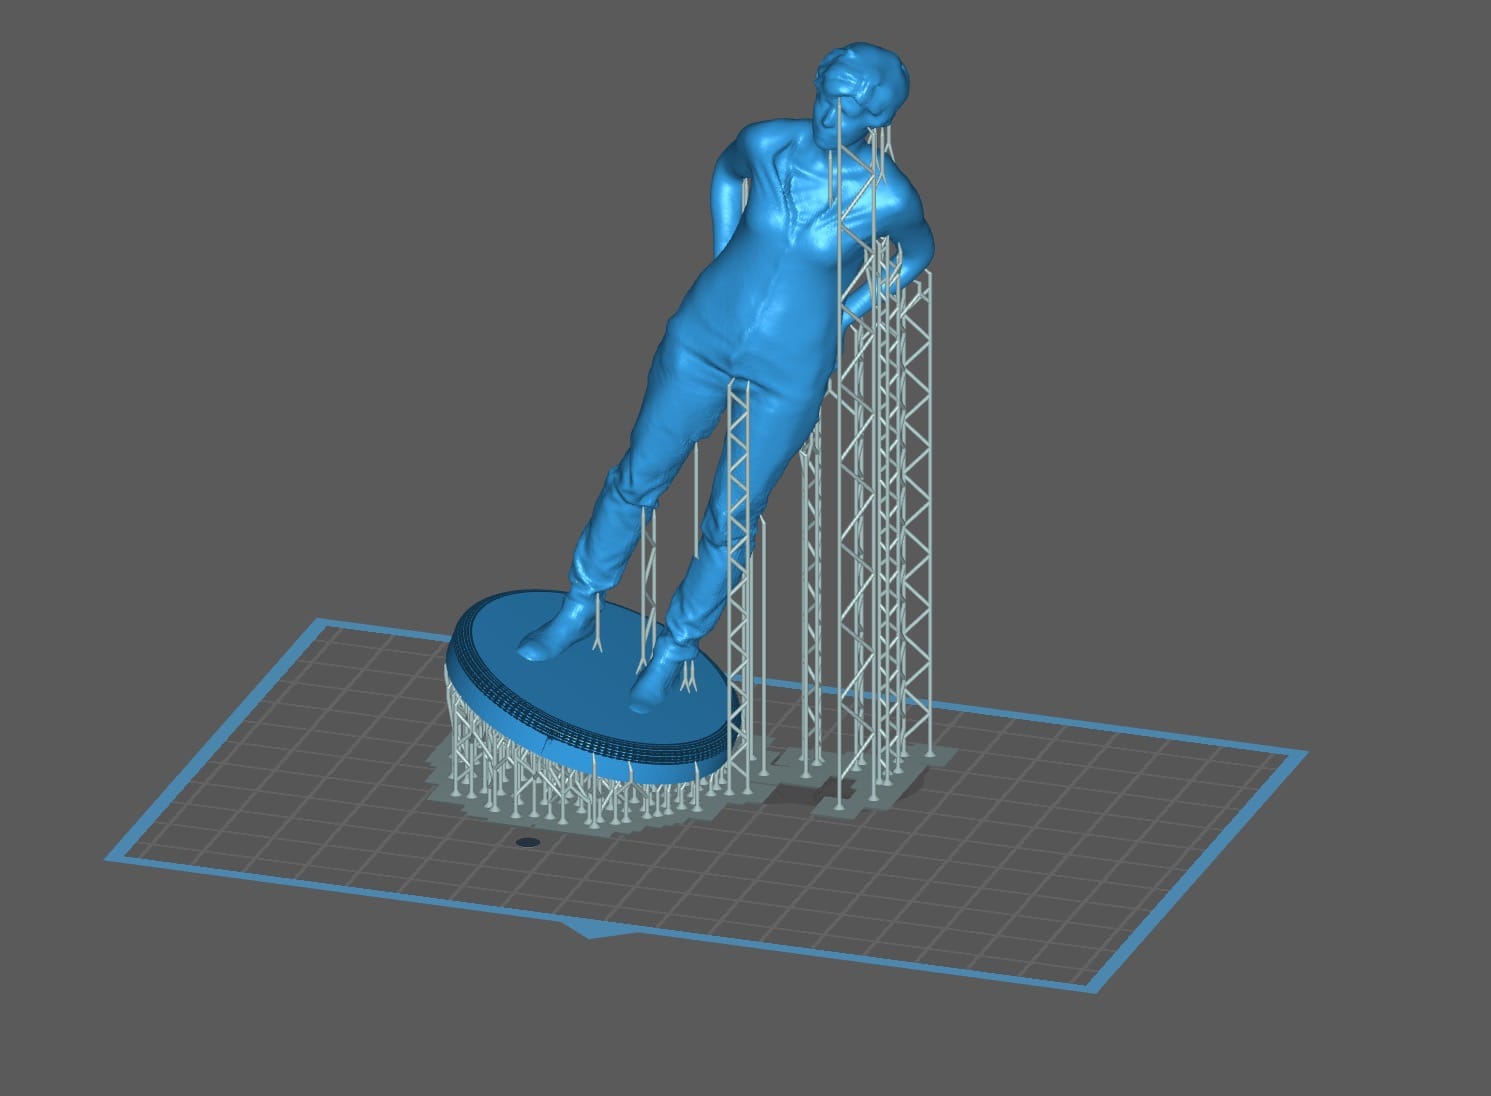  Slicing a 3D model in ChiTuBox [Source: Fabbaloo] 